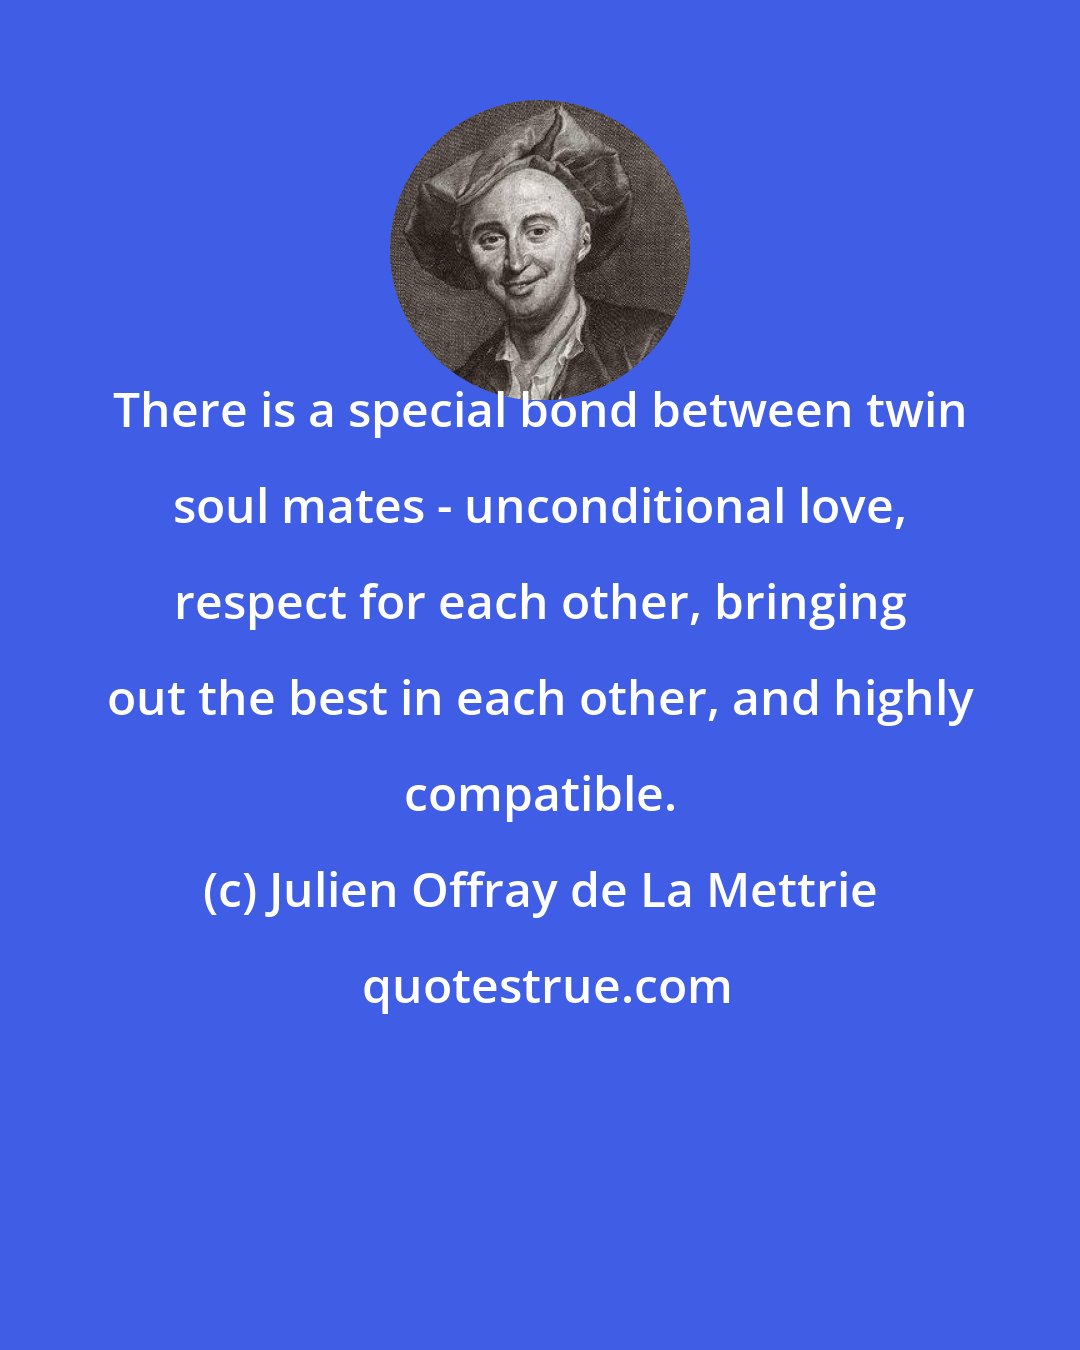 Julien Offray de La Mettrie: There is a special bond between twin soul mates - unconditional love, respect for each other, bringing out the best in each other, and highly compatible.